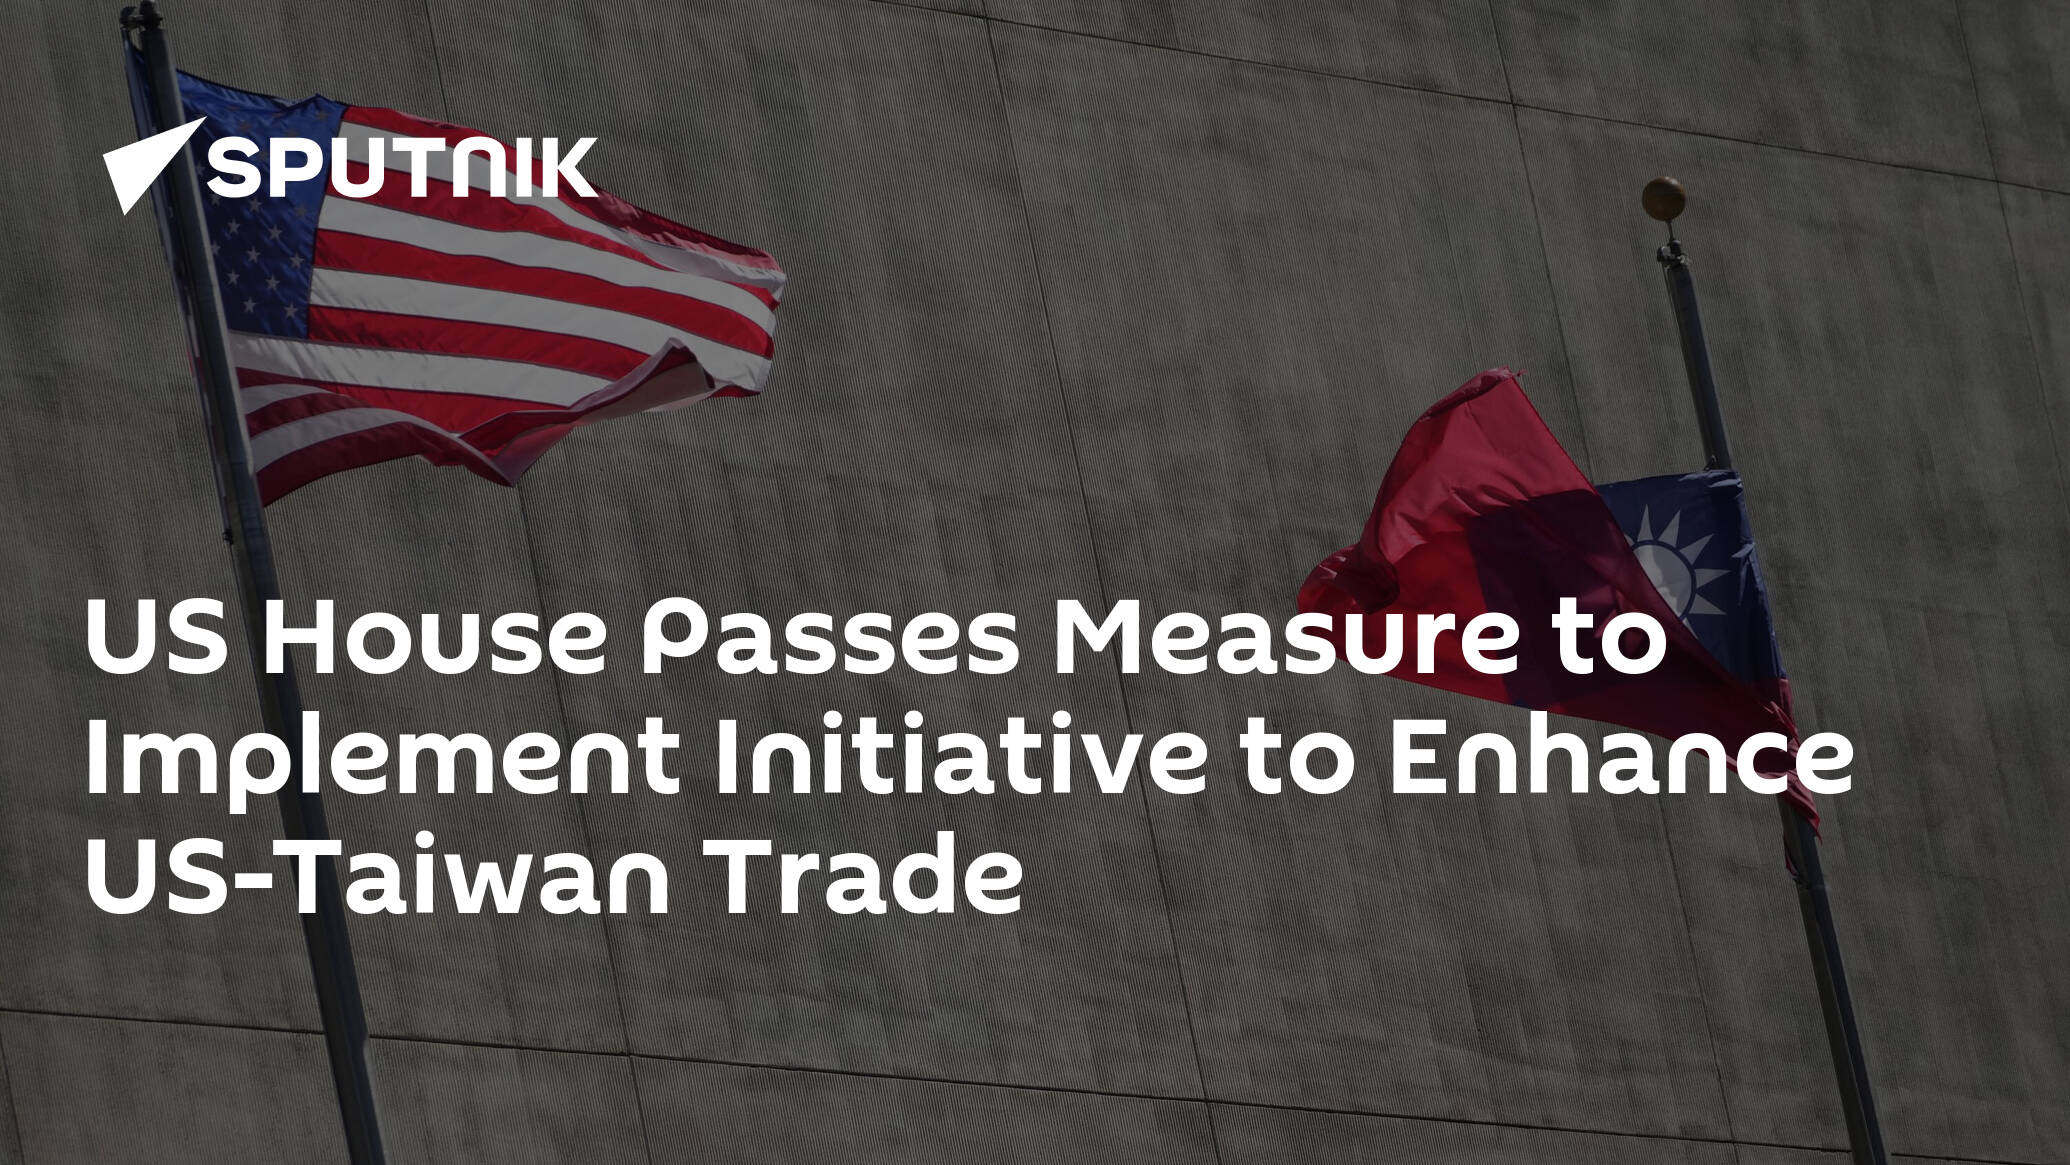 US House Passes Measure to Implement Initiative to Enhance US-Taiwan Trade